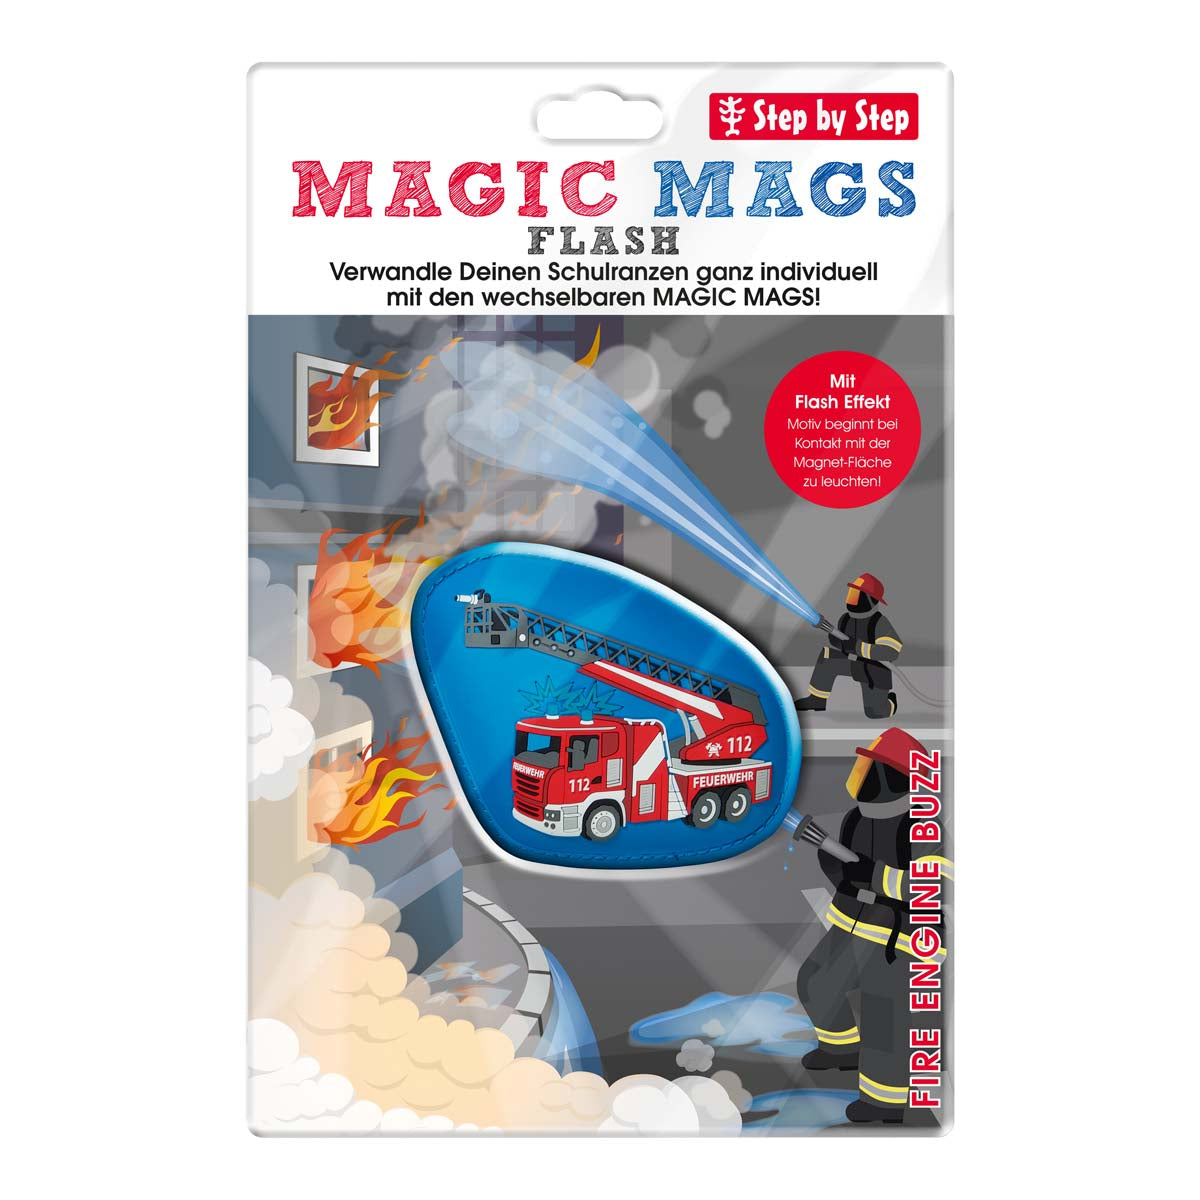 Step by Step MAGIC MAGS FLASH